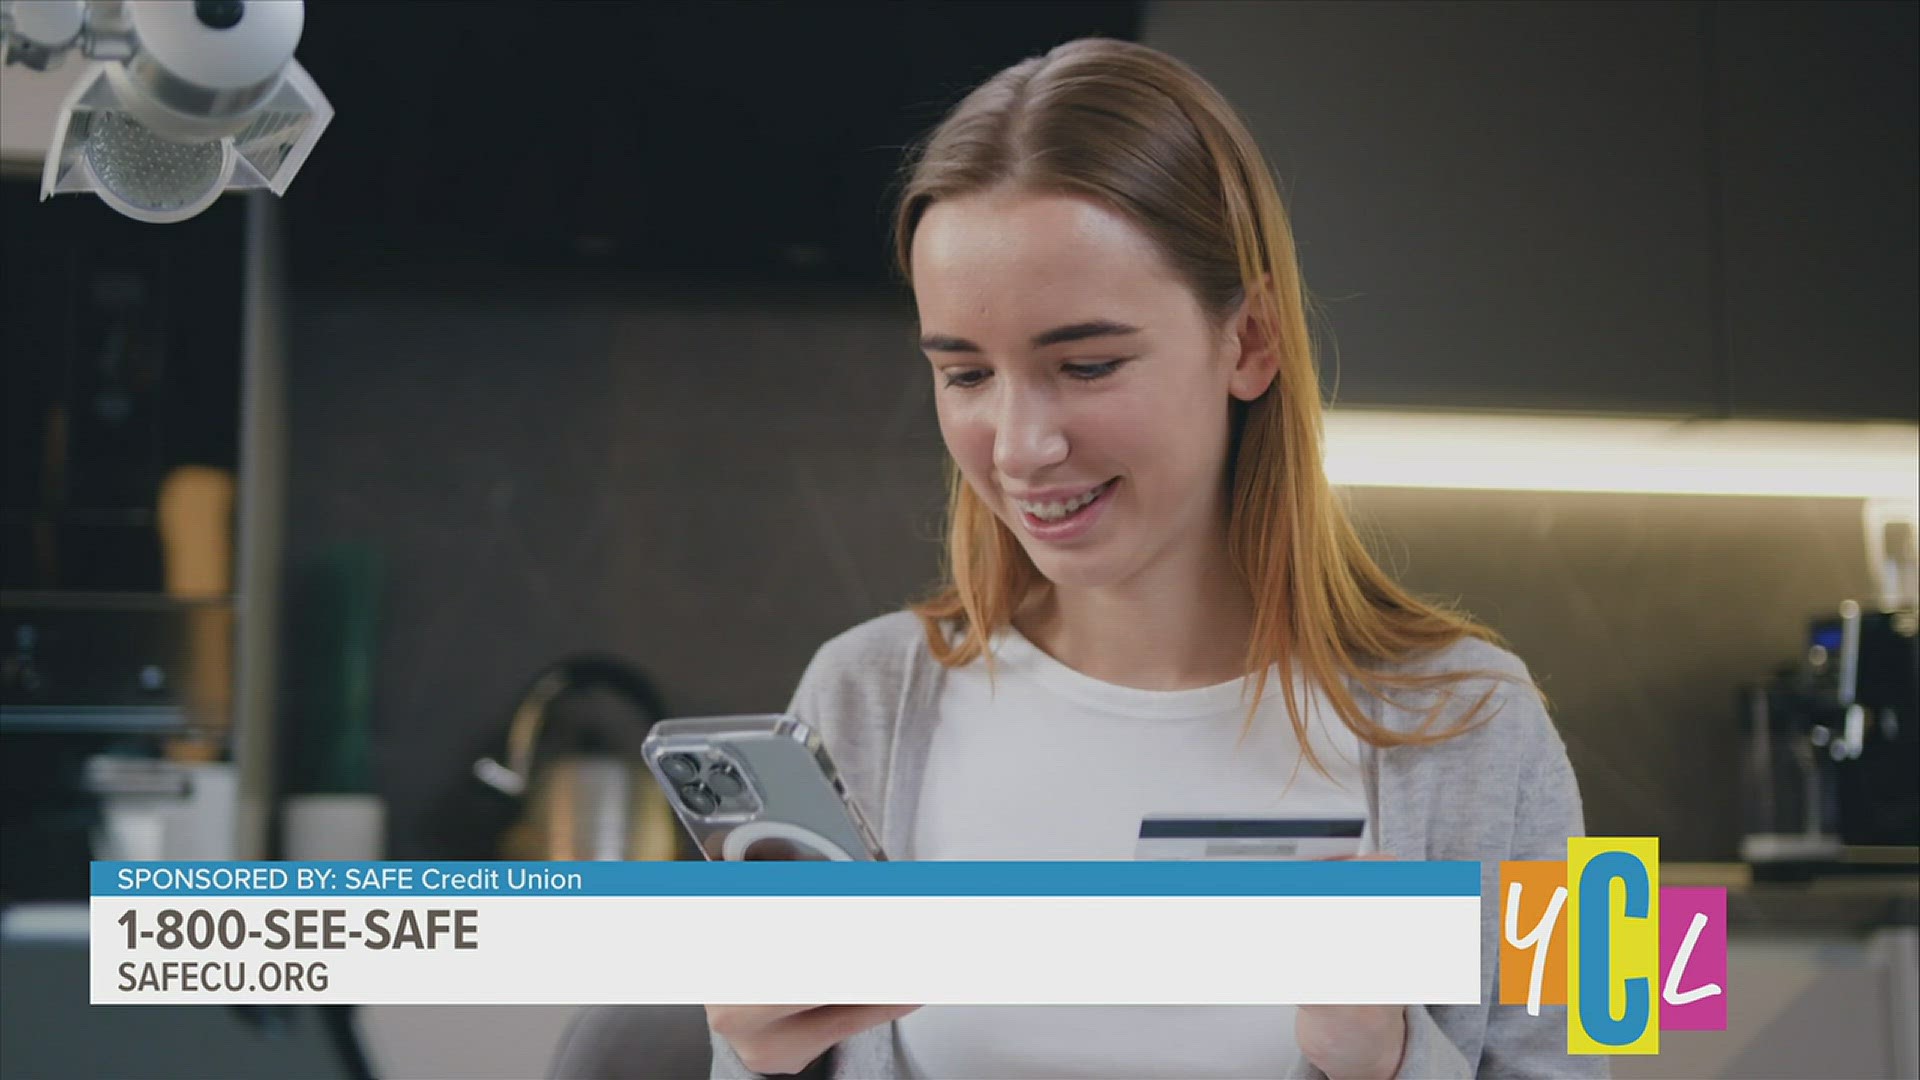 SAFE Credit Union shares financial wisdom to help young adults soar into new beginnings while avoiding debt. This segment is paid for by SAFE Credit Union.